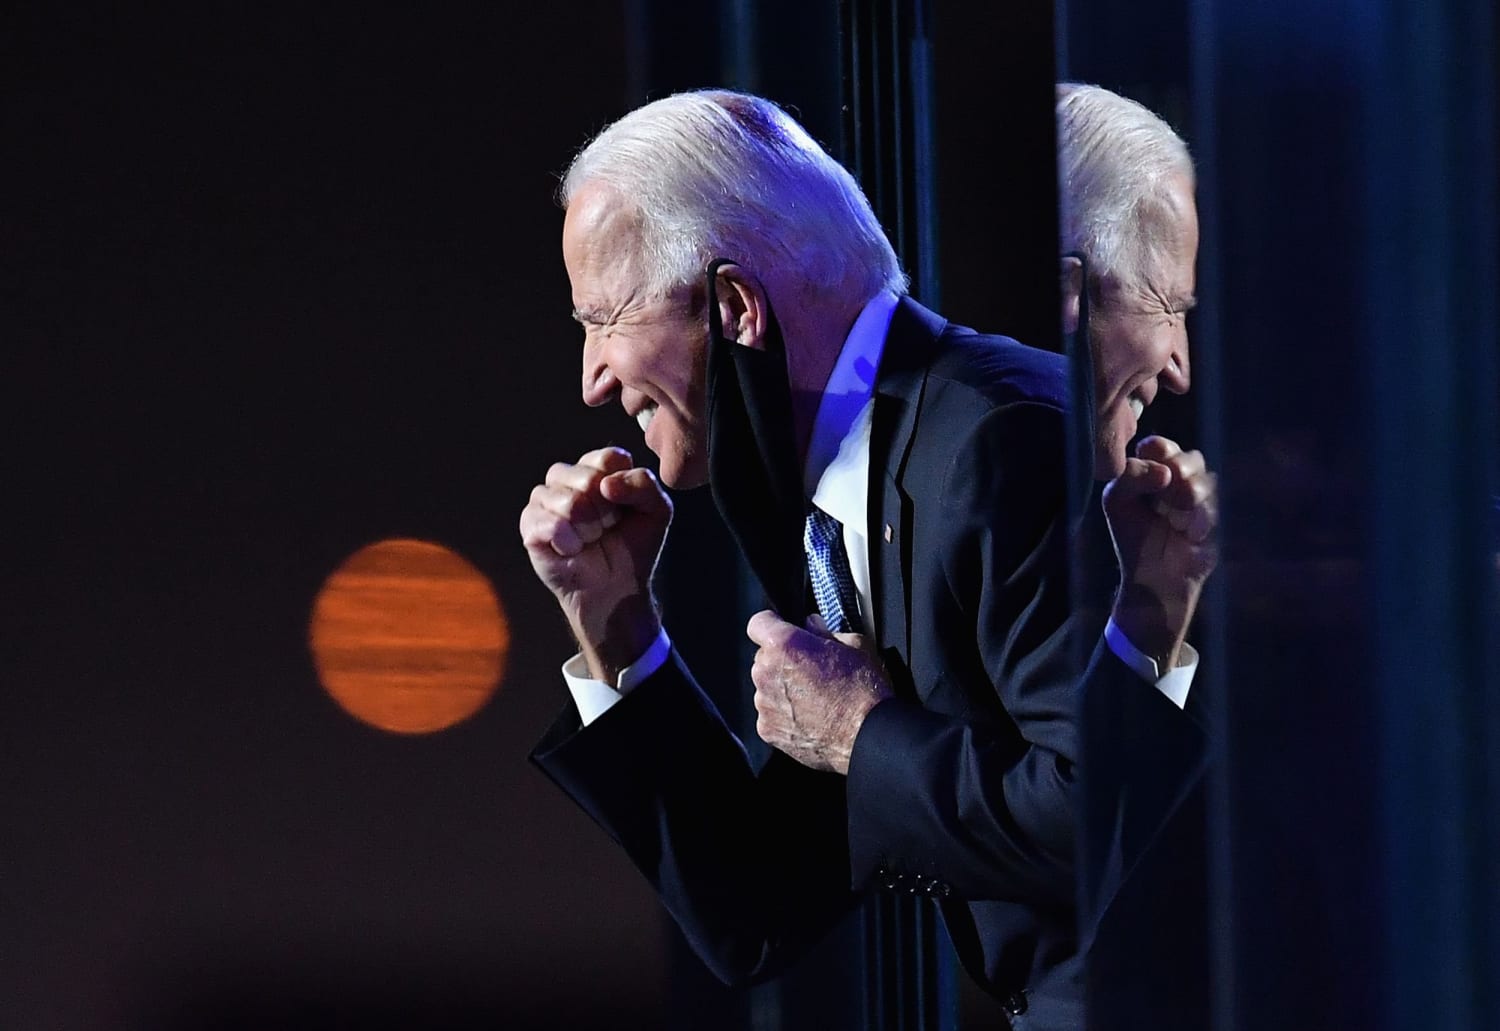 Covid, immigration and voting rights: Checking in on Biden’s year-one promises